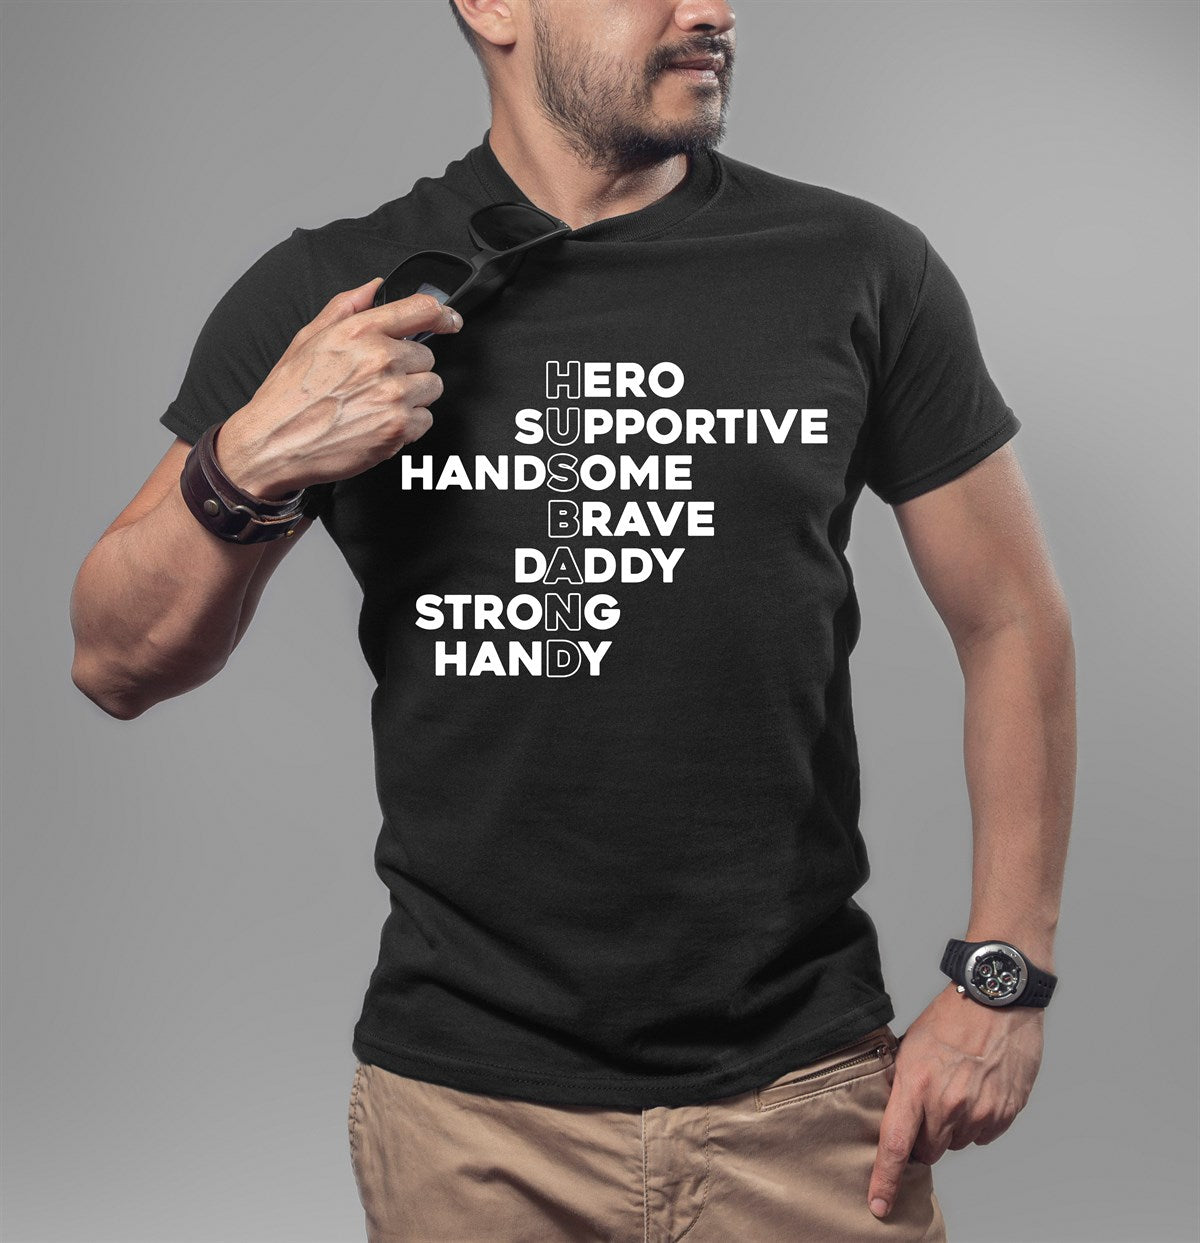 Husband: Hero Supportive Handsome Brave Daddy Strong Handy T-Shirt or Crew Sweatshirt